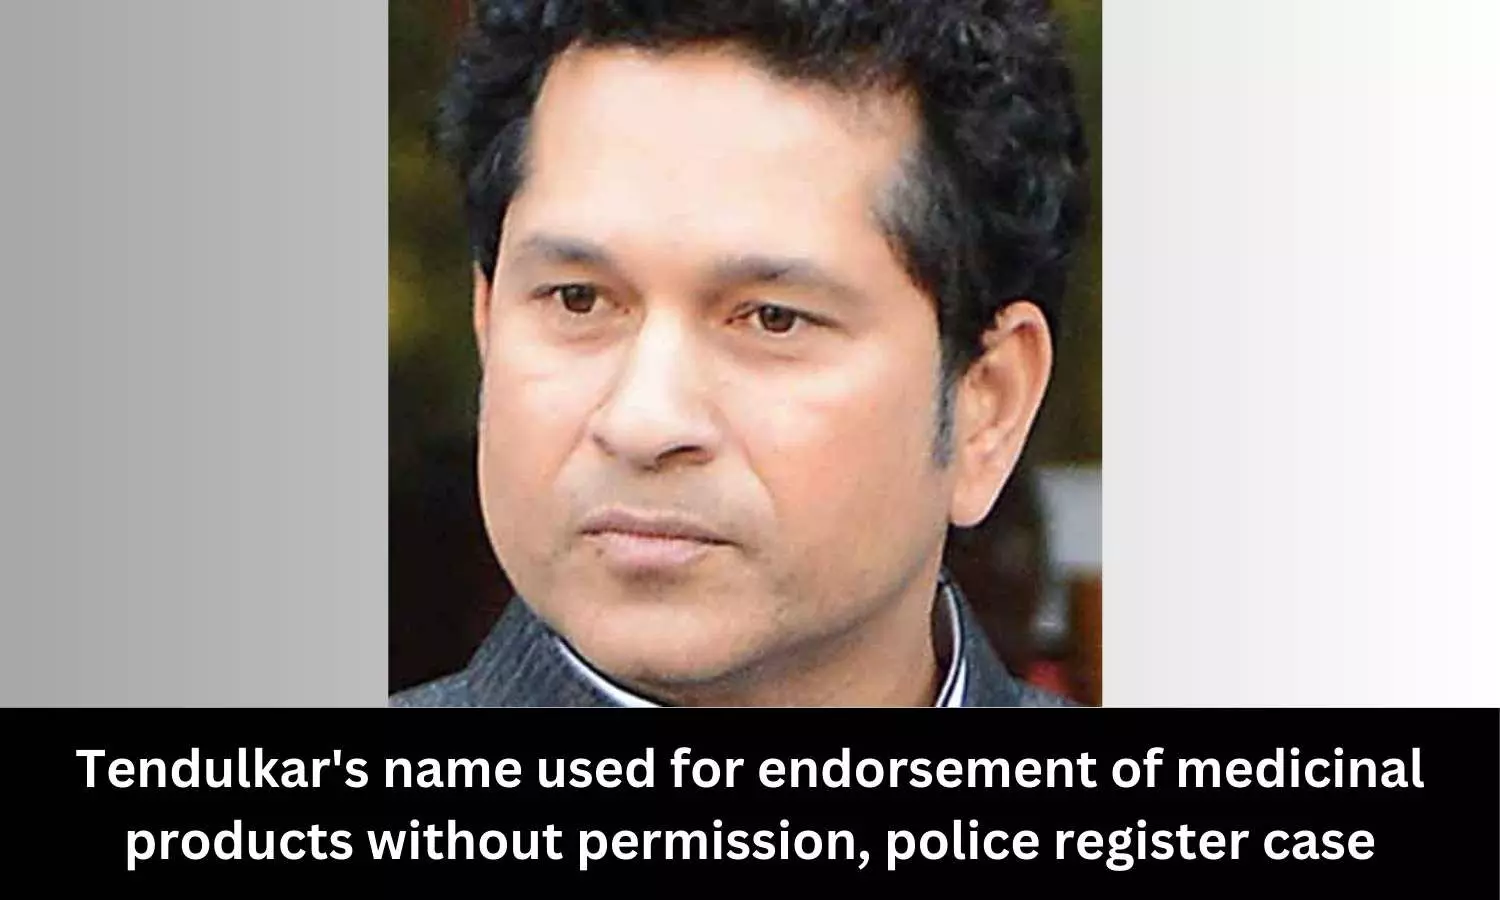 Sachin Tendulkars name used for promotion of medicinal products without permission, FIR registered